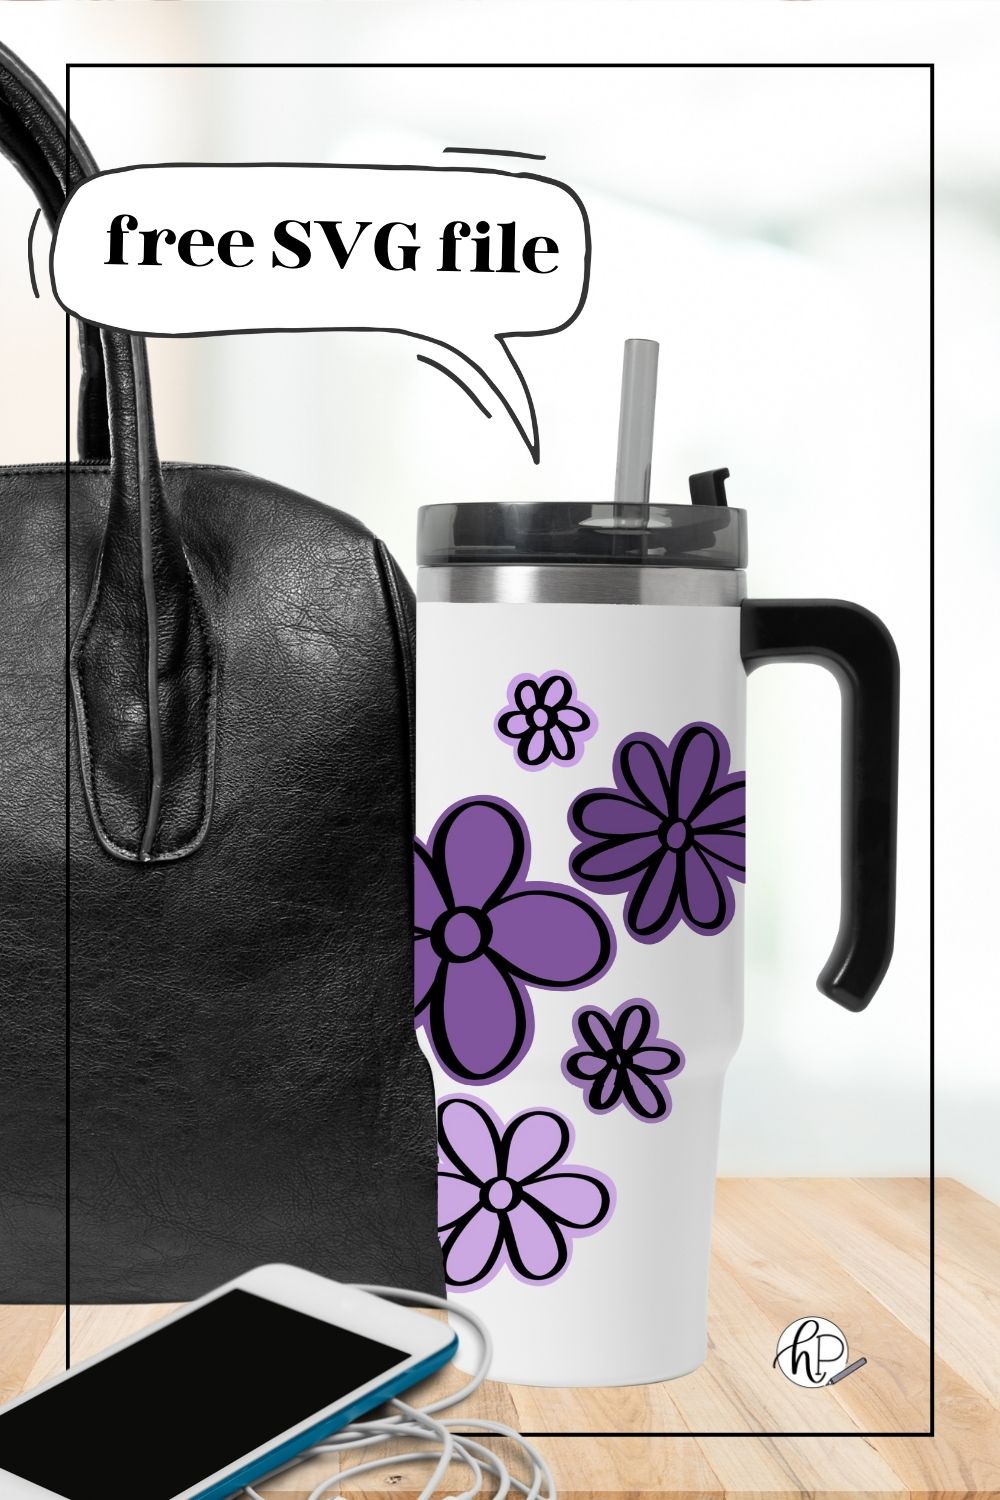 2 Layer cut file of 5 hand drawn flowers (free), shown cut from permanent vinyl on a tumbler with a purple background layer and black flower outline. Text overlay reads 'free SVG file'